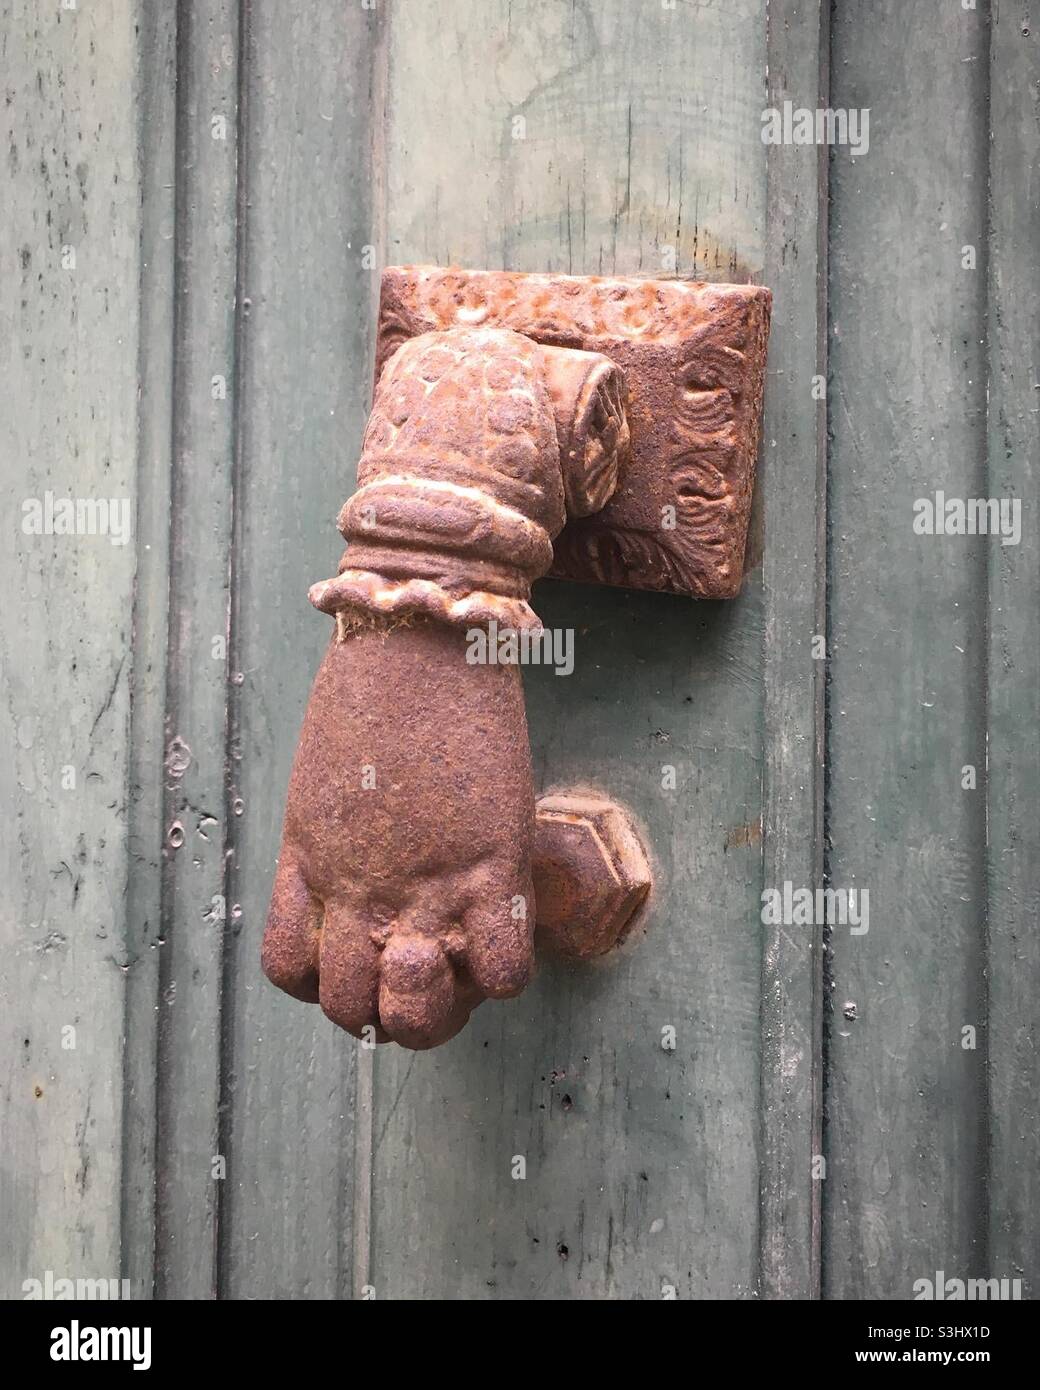 Old door knocker in the shape of a hand Stock Photo